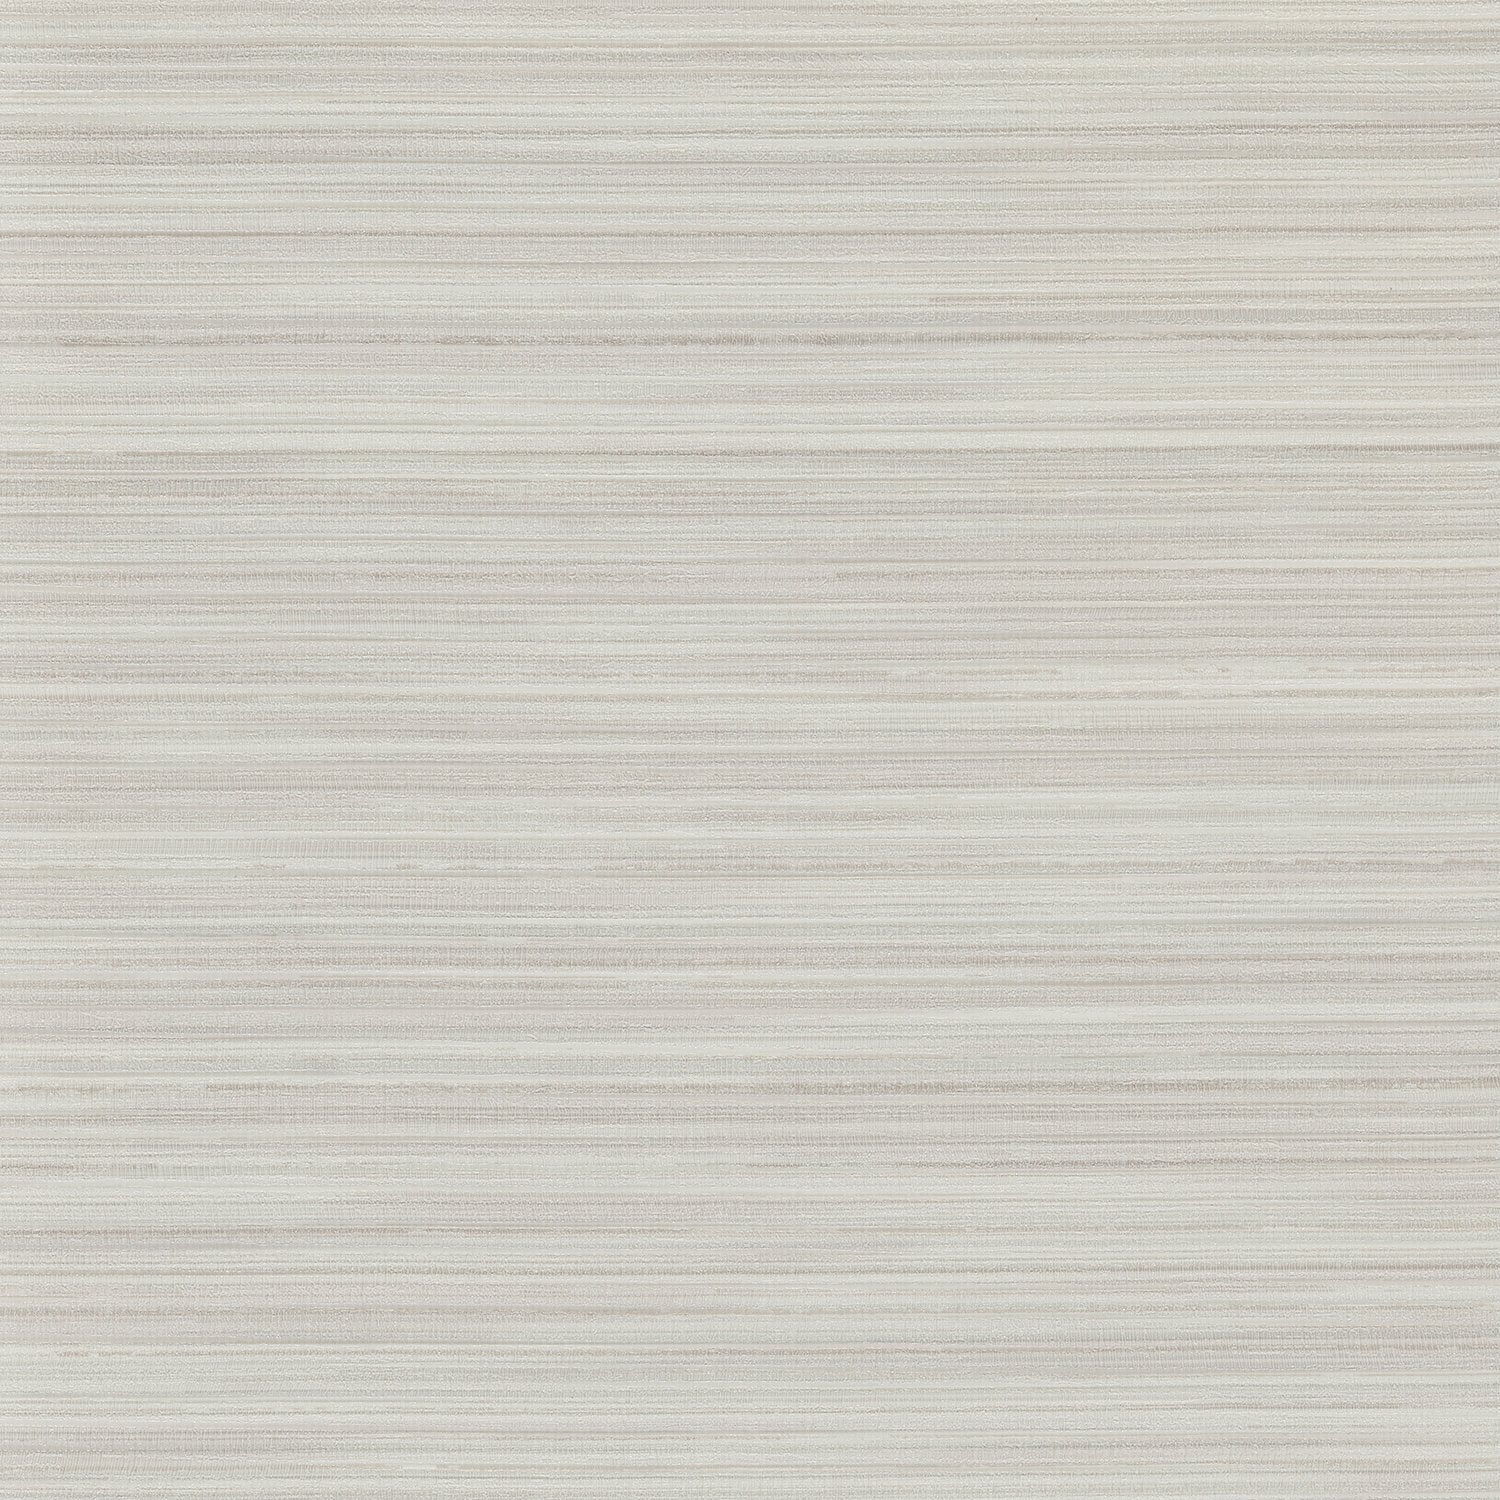 Gallery Silk - Y47733 Zinc White - Wallcovering - Vycon - Kube Contract